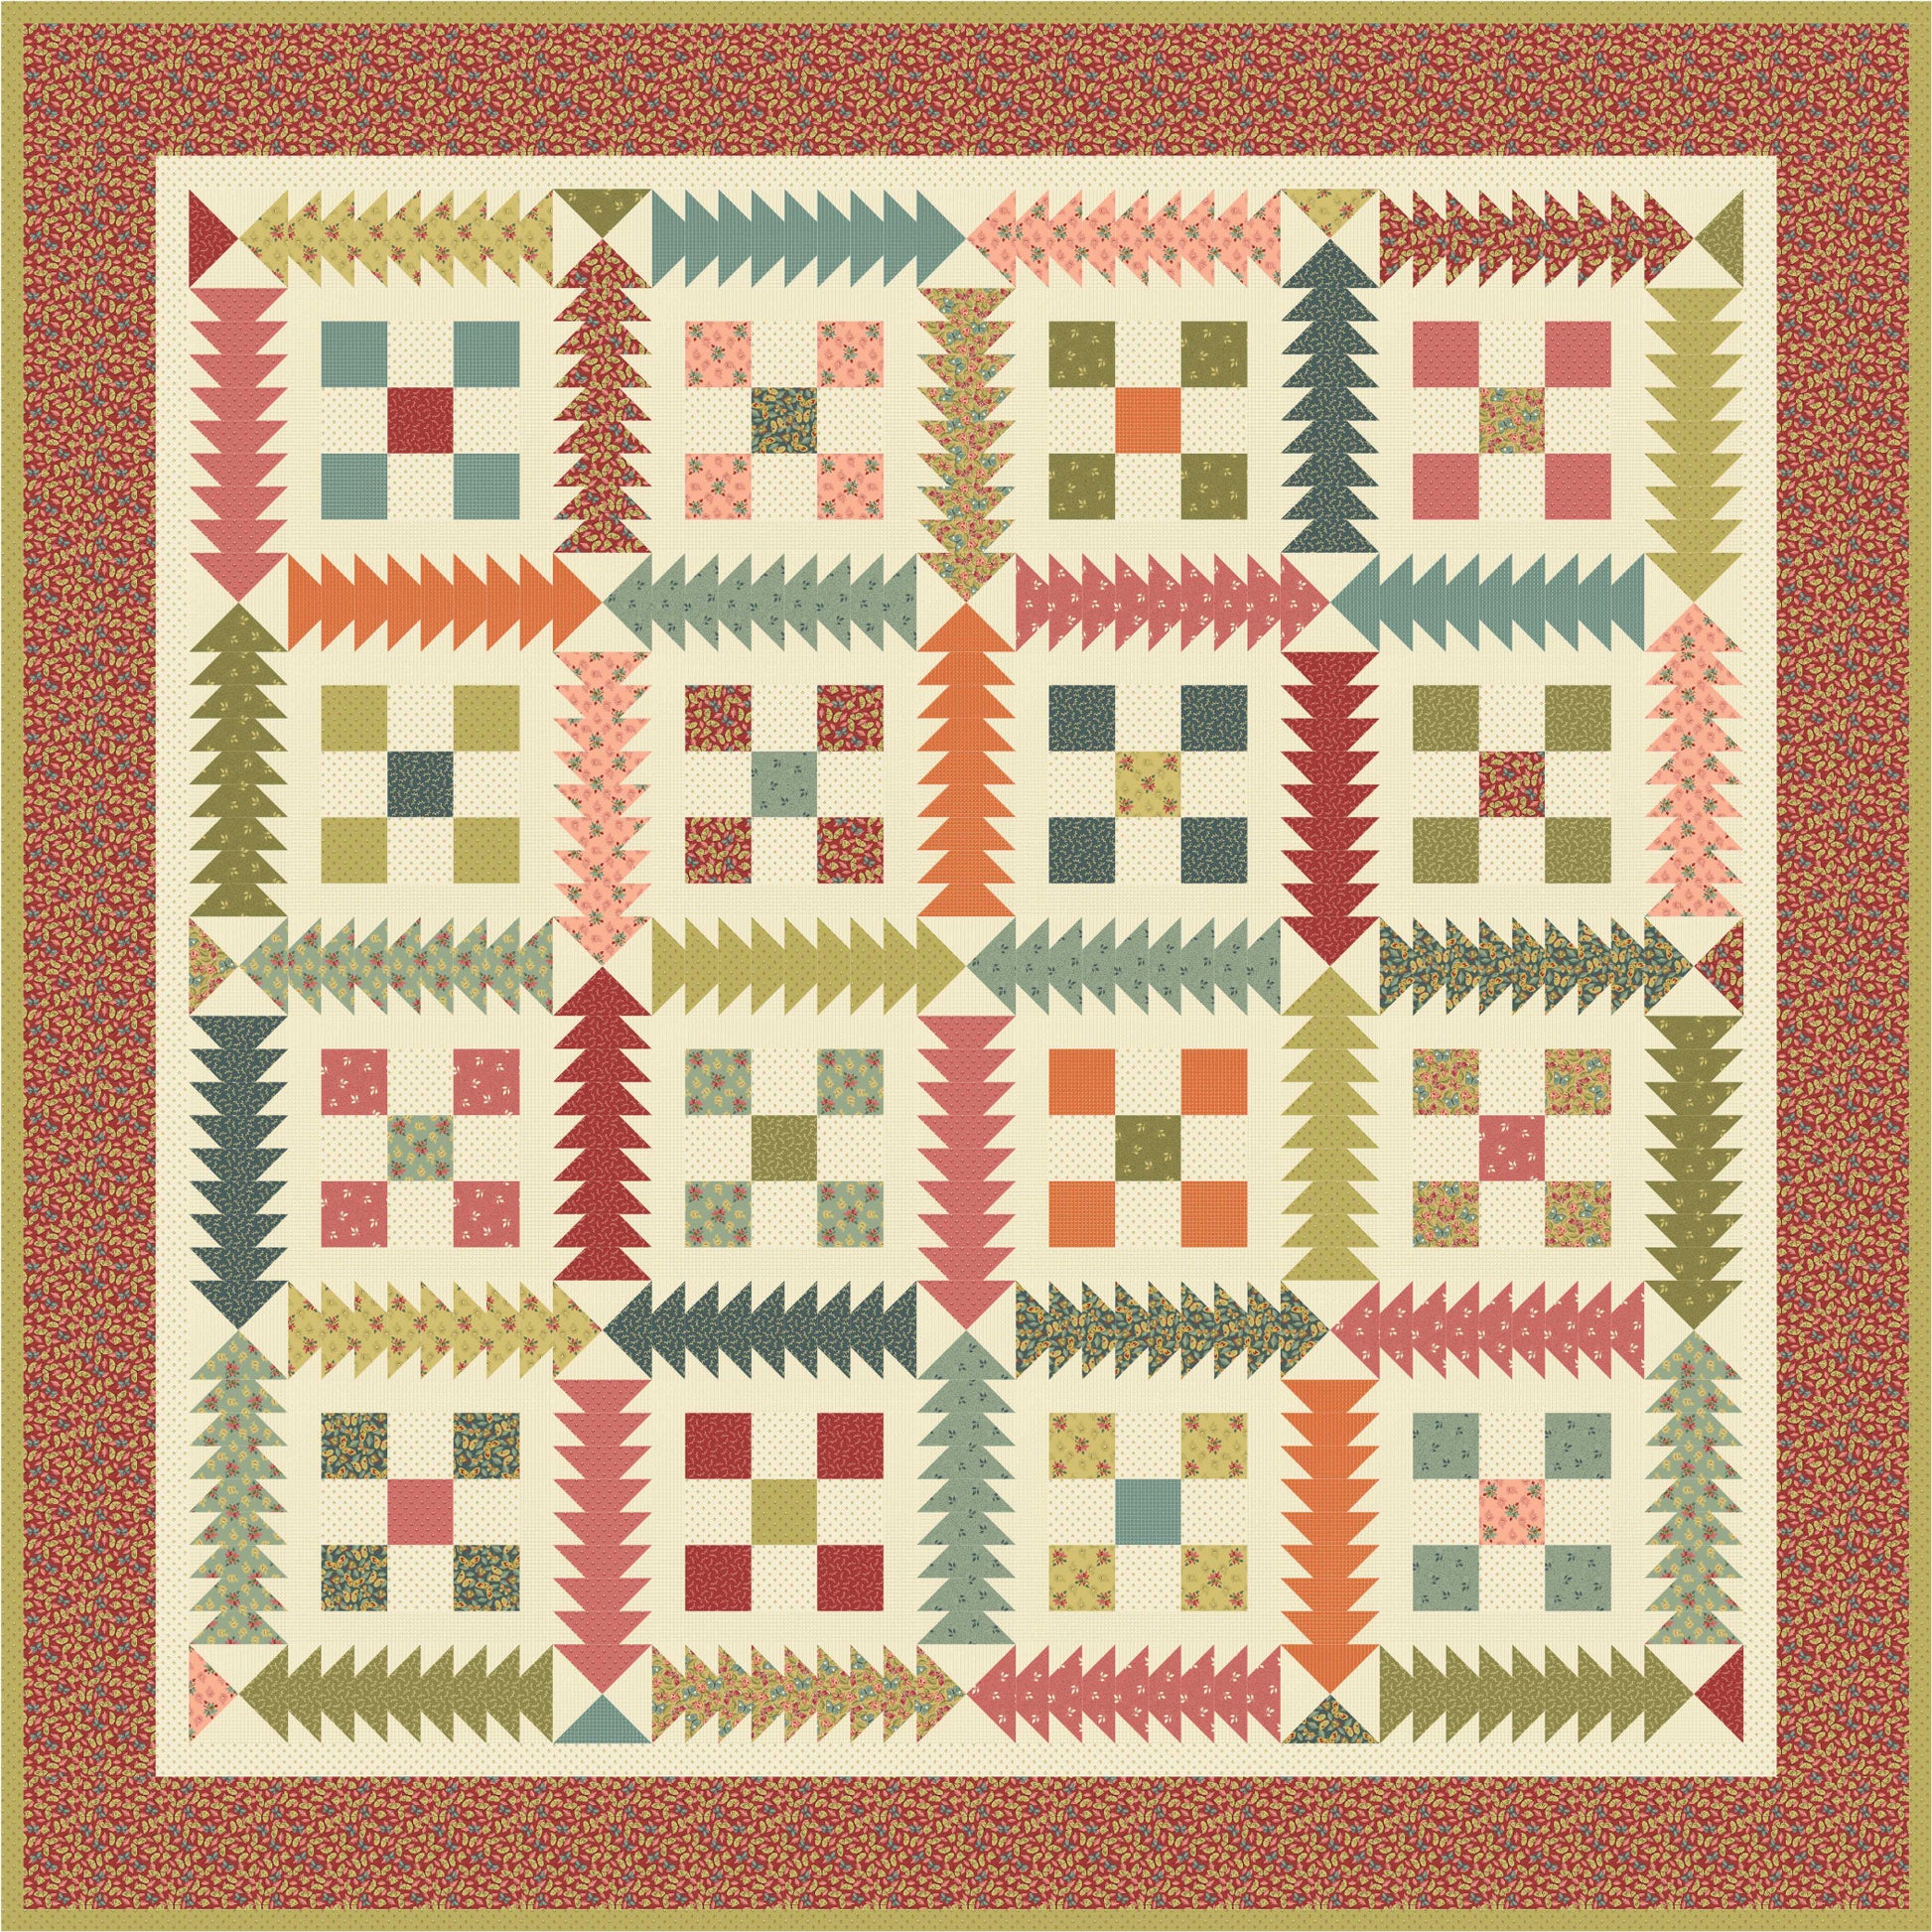 Back & Forth - Square Dance - Carrot - Licence To Quilt